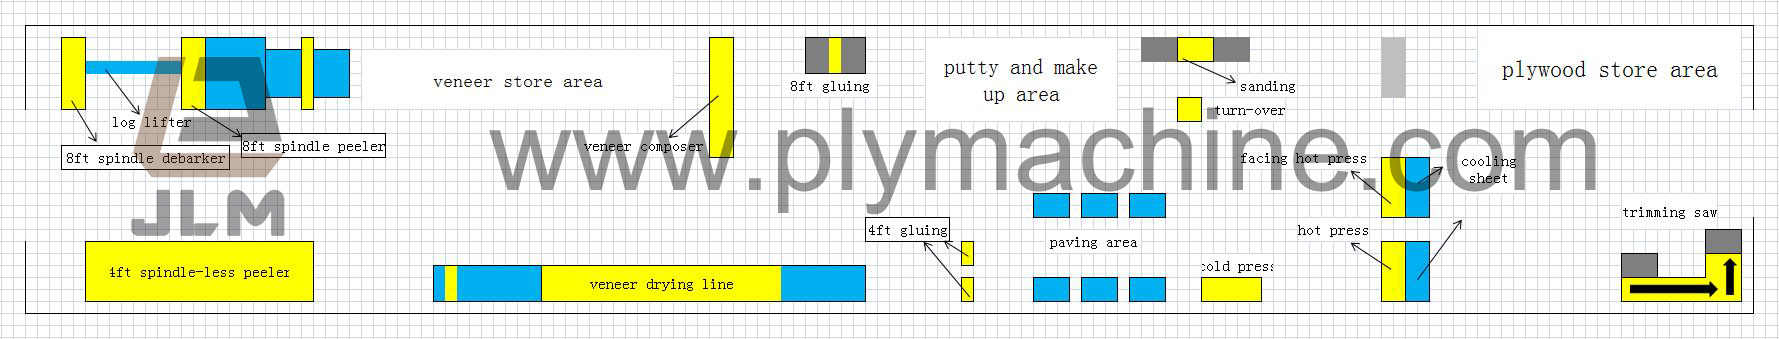 Plywood-factory-layout